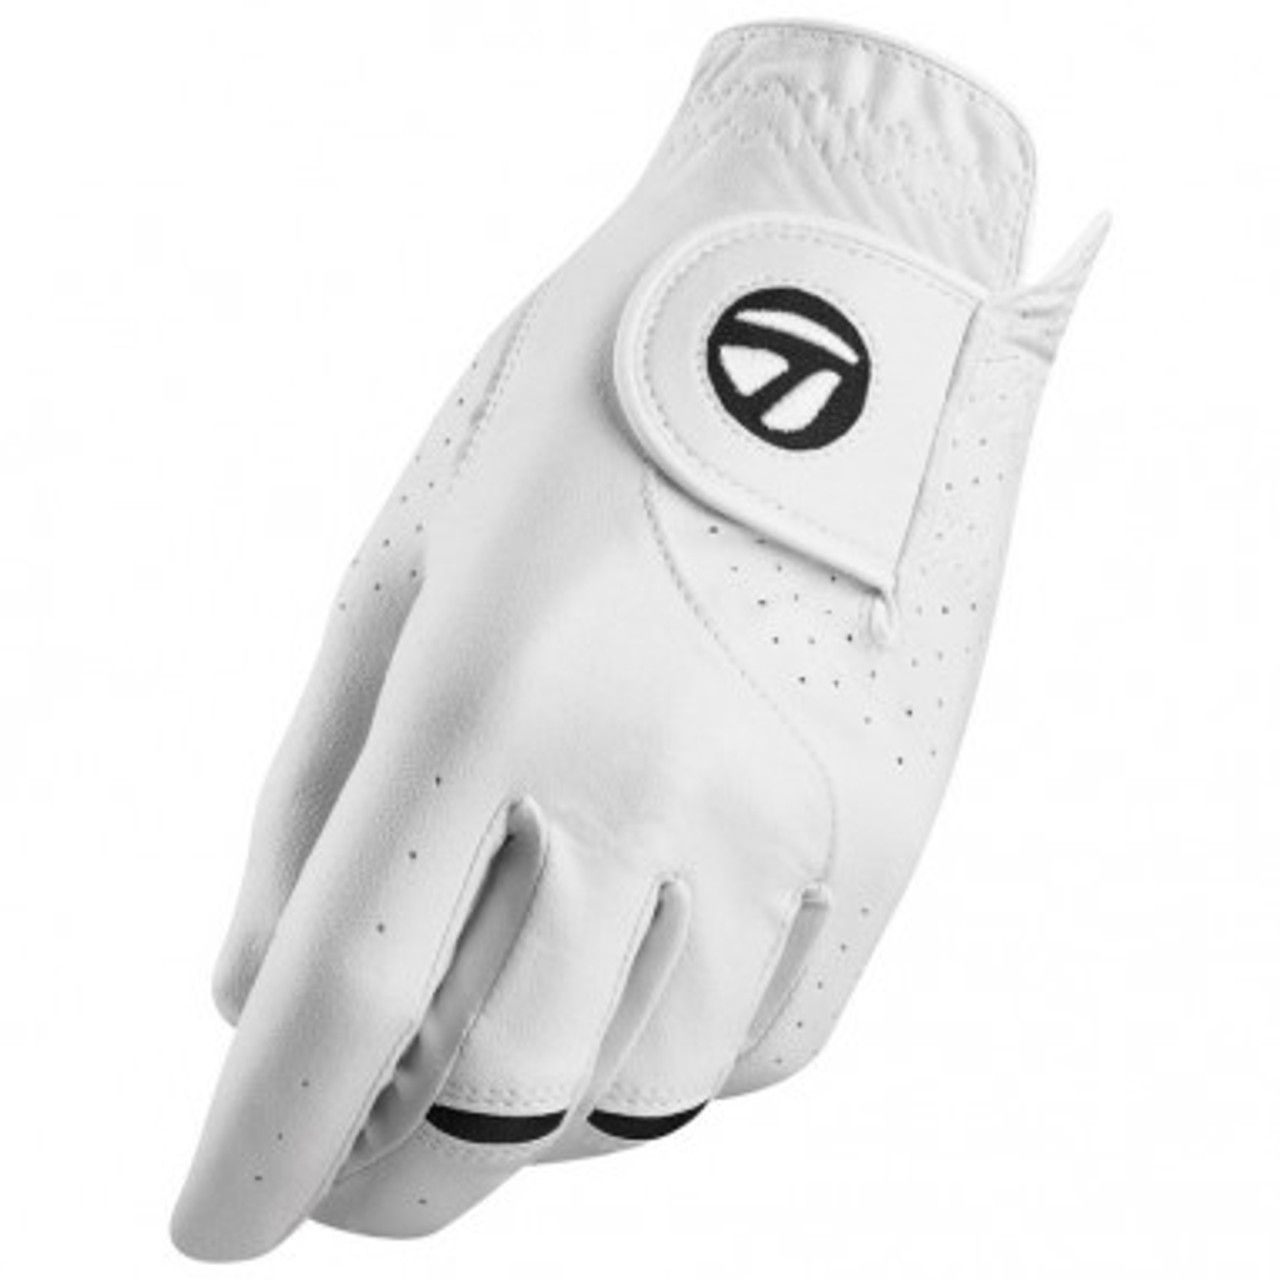 Get a Pair of TaylorMade Stratus Tech Golf Gloves Today | Golfsupport.com